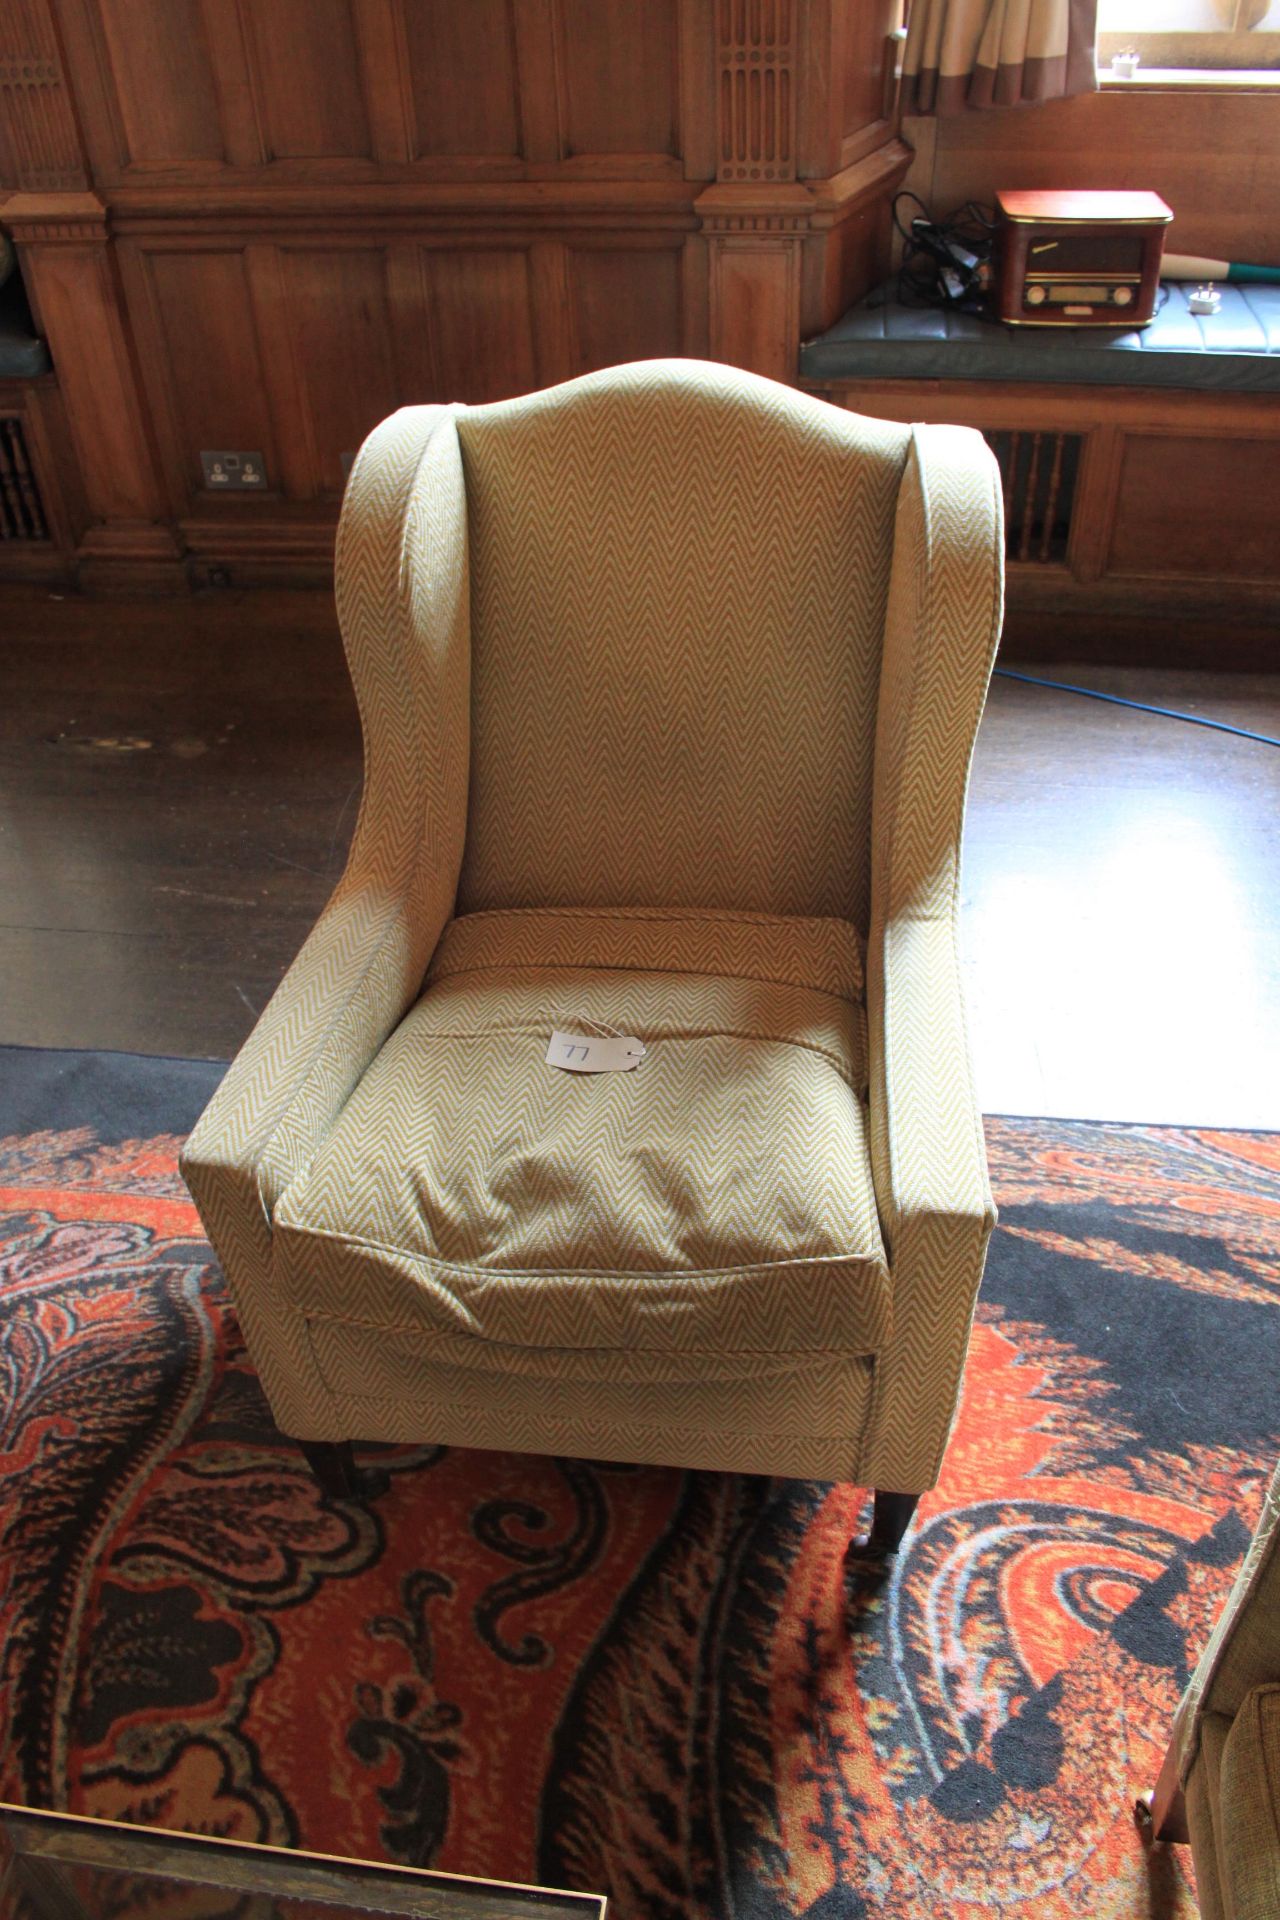 Gold Wingback Chair With Front Castors 600 x 700 x 1000mm